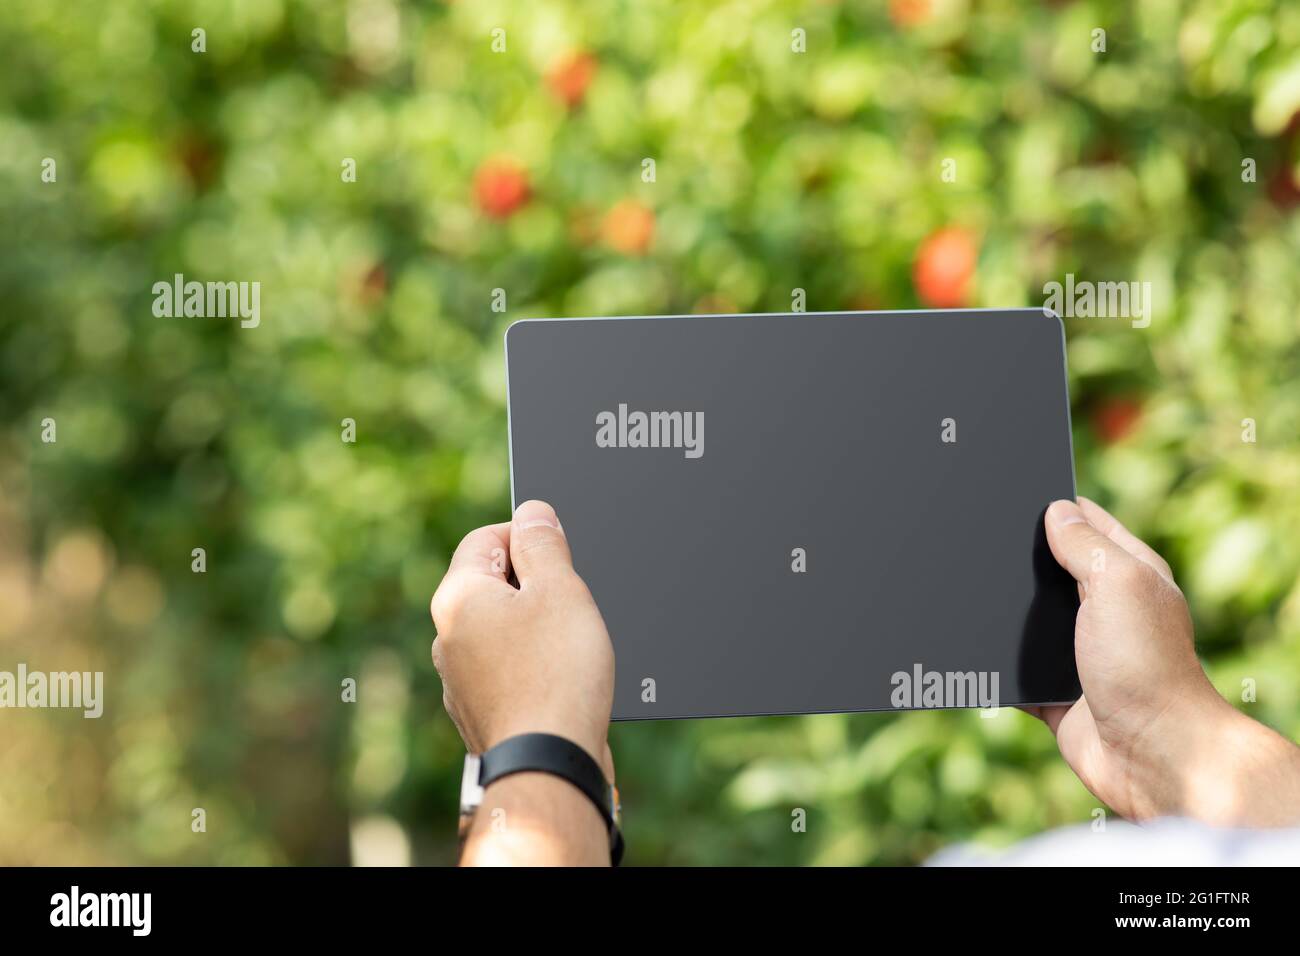 Eco blog, modern business with gadget, farm management Stock Photo